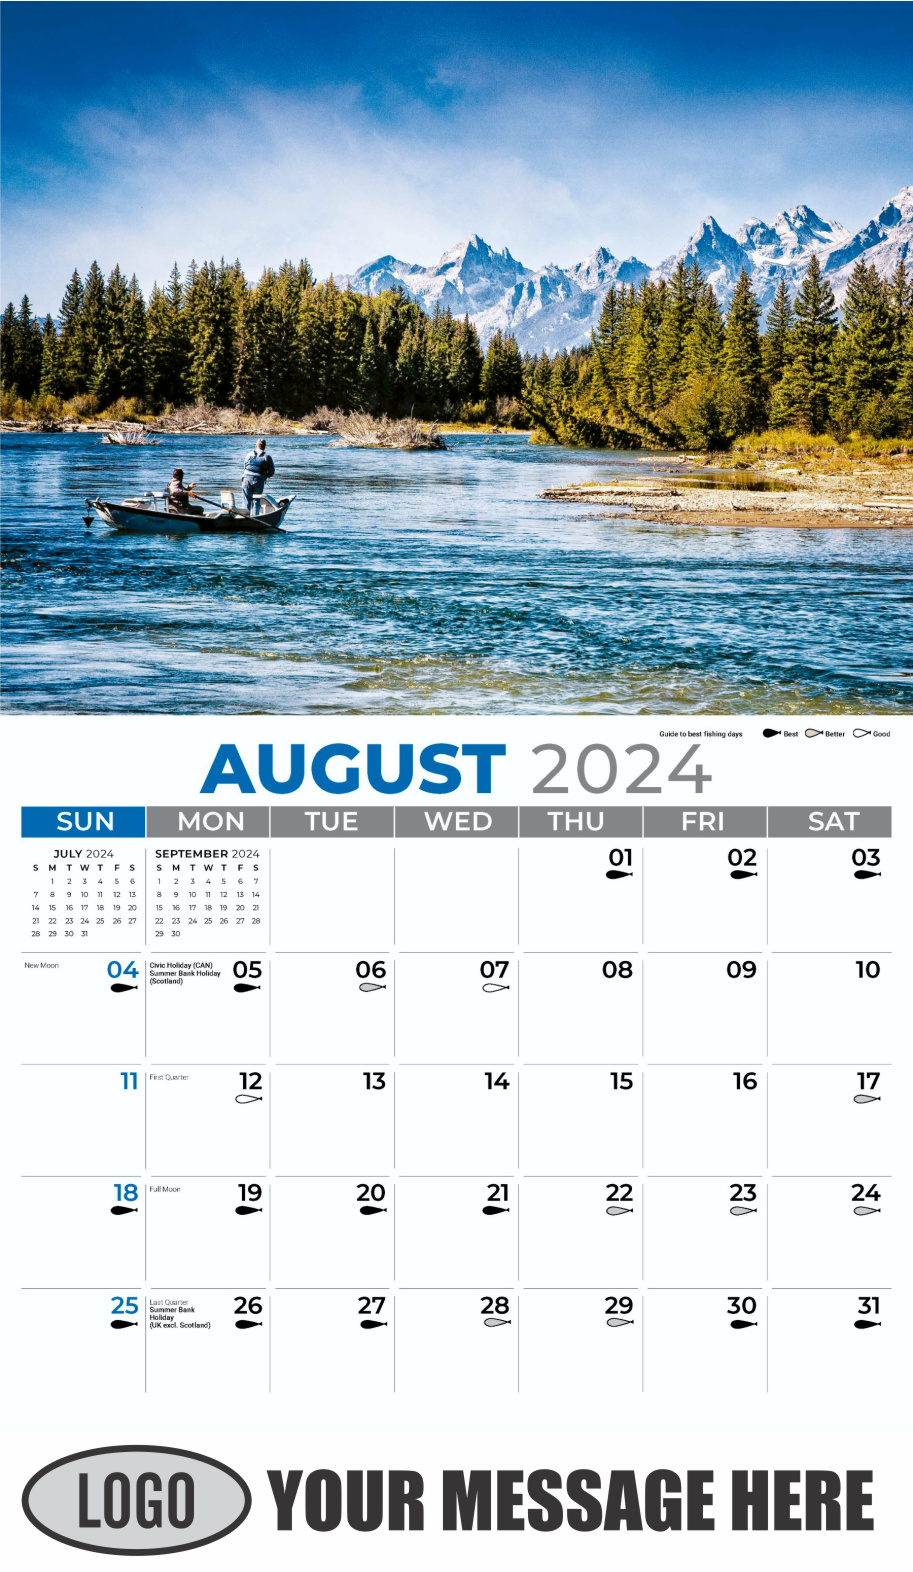 Fishing and Hunting 2024 Business Promotion Calendar - August